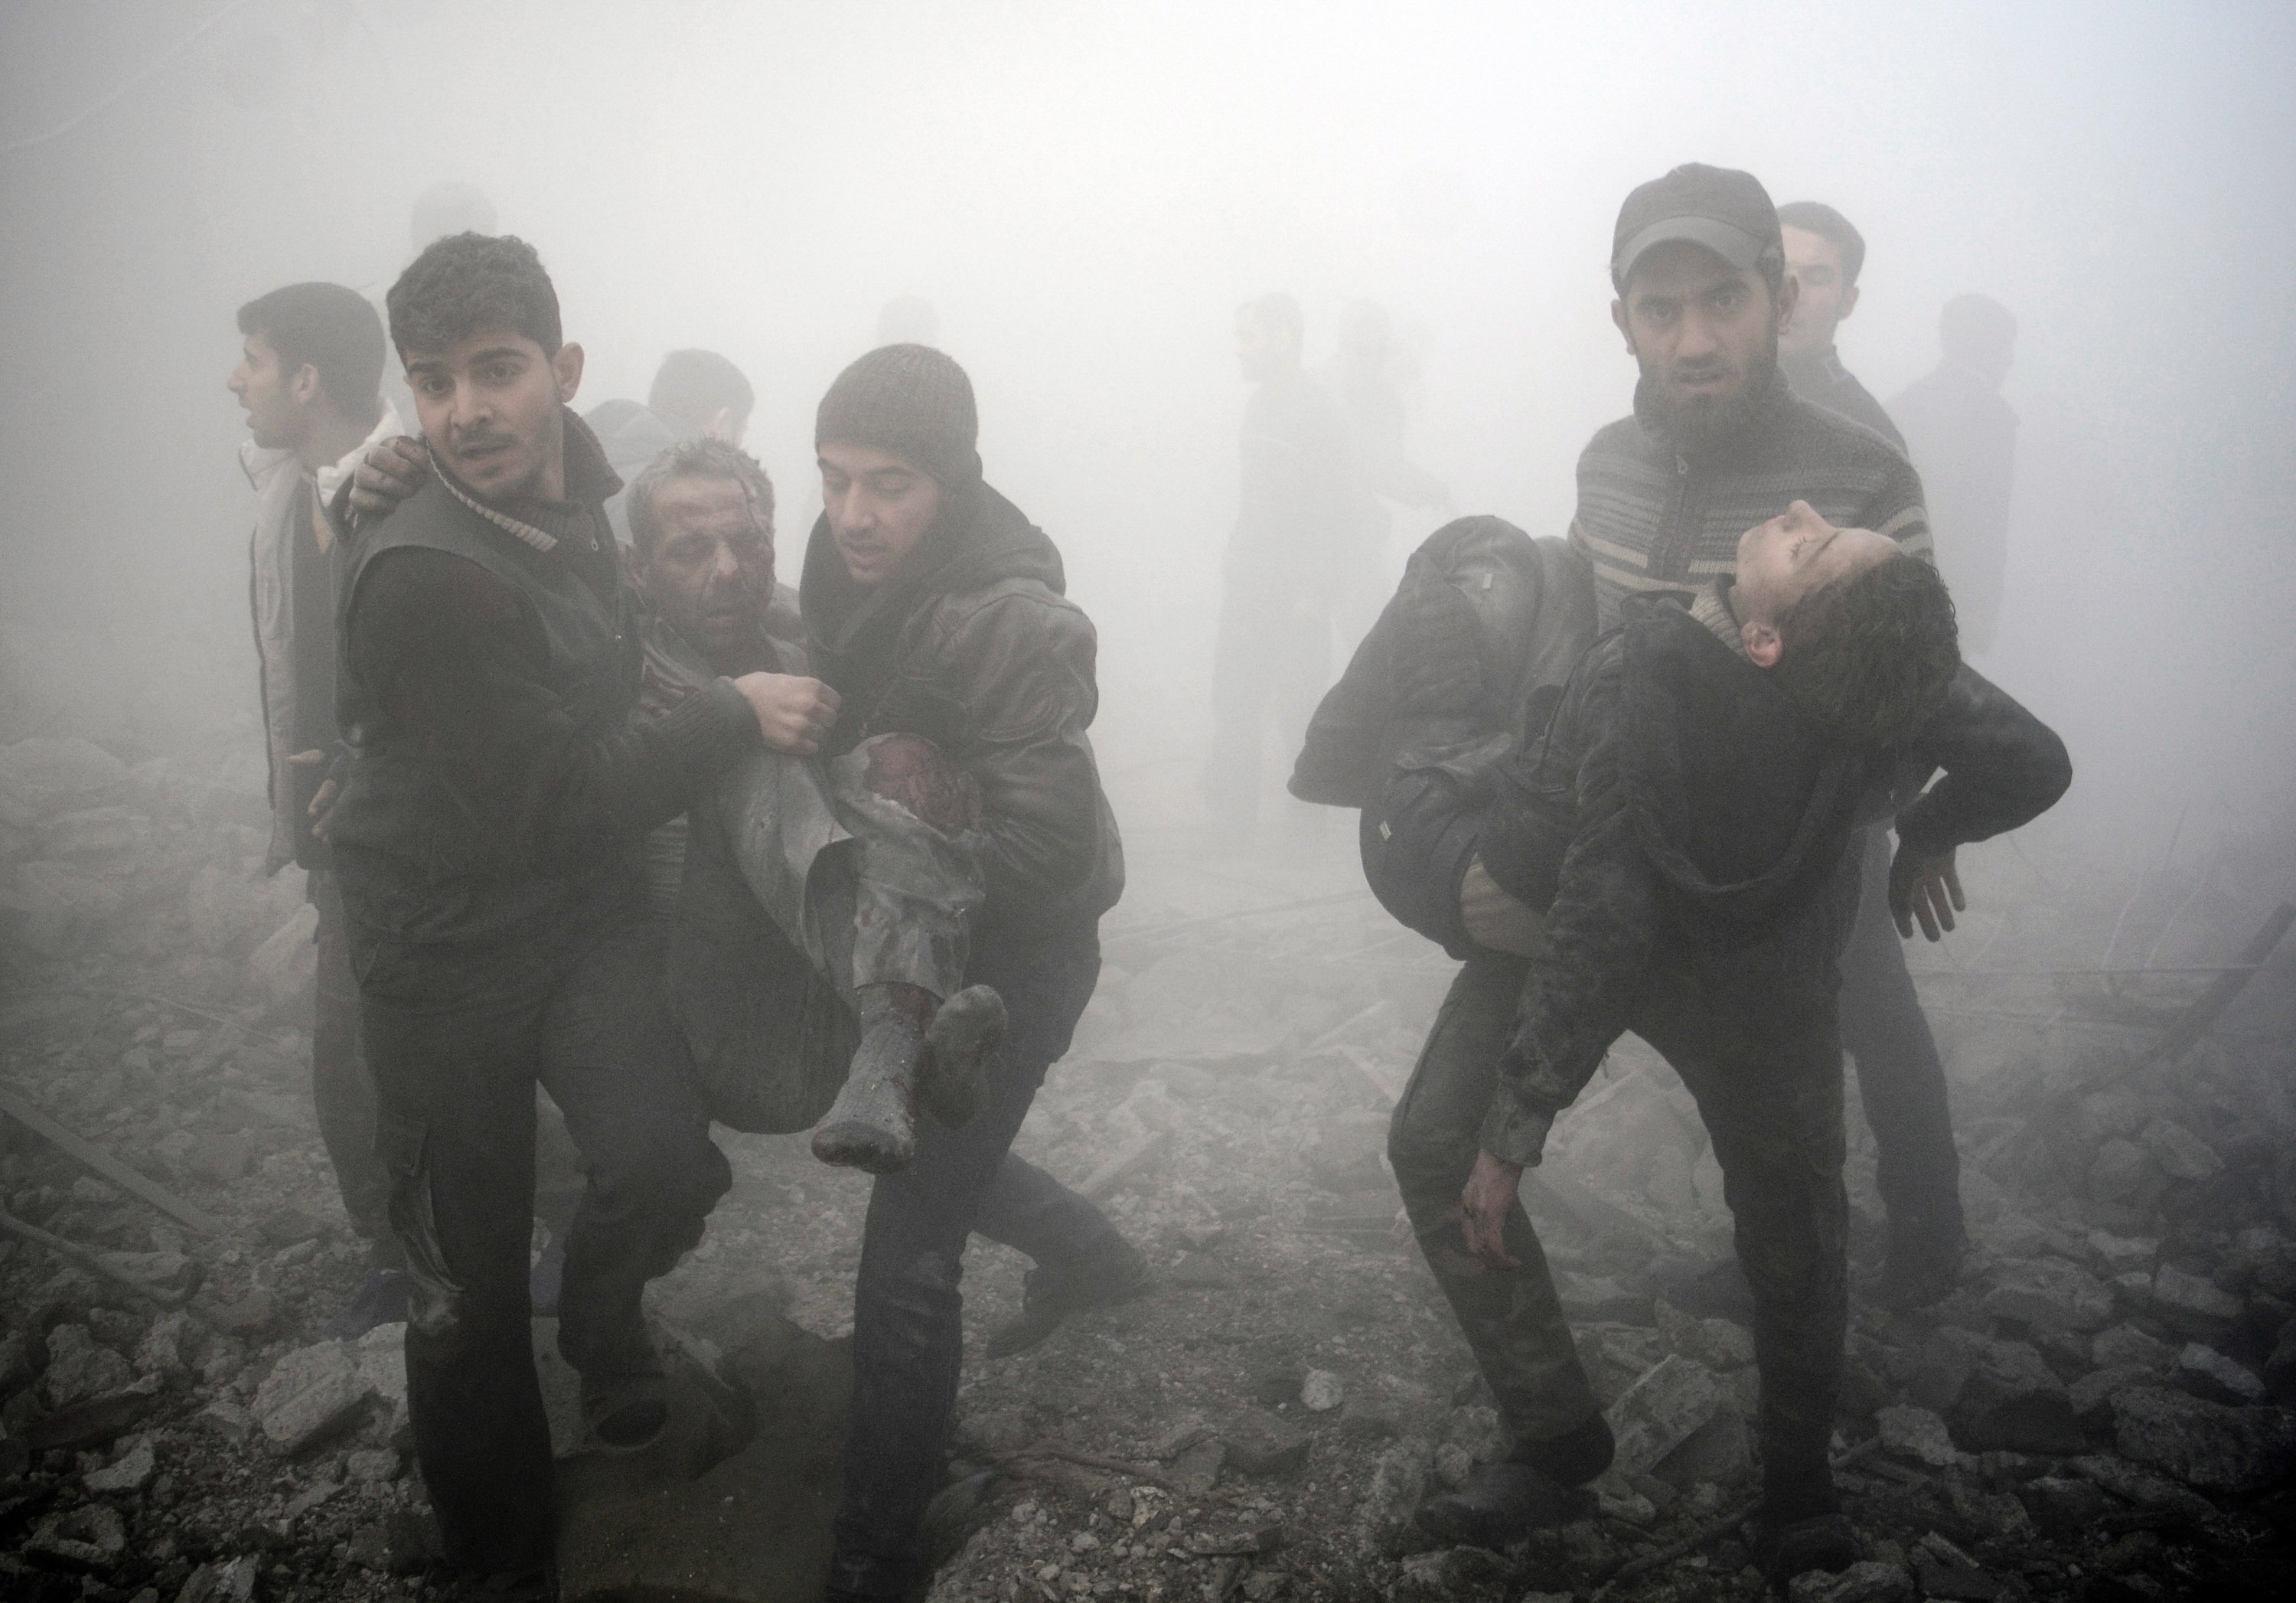 Syrian men carry injured victims following a reported air strike on the besieged rebel-held town of Douma, northeast of the capital Damascus on January 21, 2015. Rebel-held towns such as Douma face frequent aerial and tank bombardment and the siege means food is scarce and medical facilities are ill-equipped to handle either illness or injury. AFP PHOTO / SAMEER AL-DOUMY / AFP PHOTO / - AND SAMEER AL-DOUMY